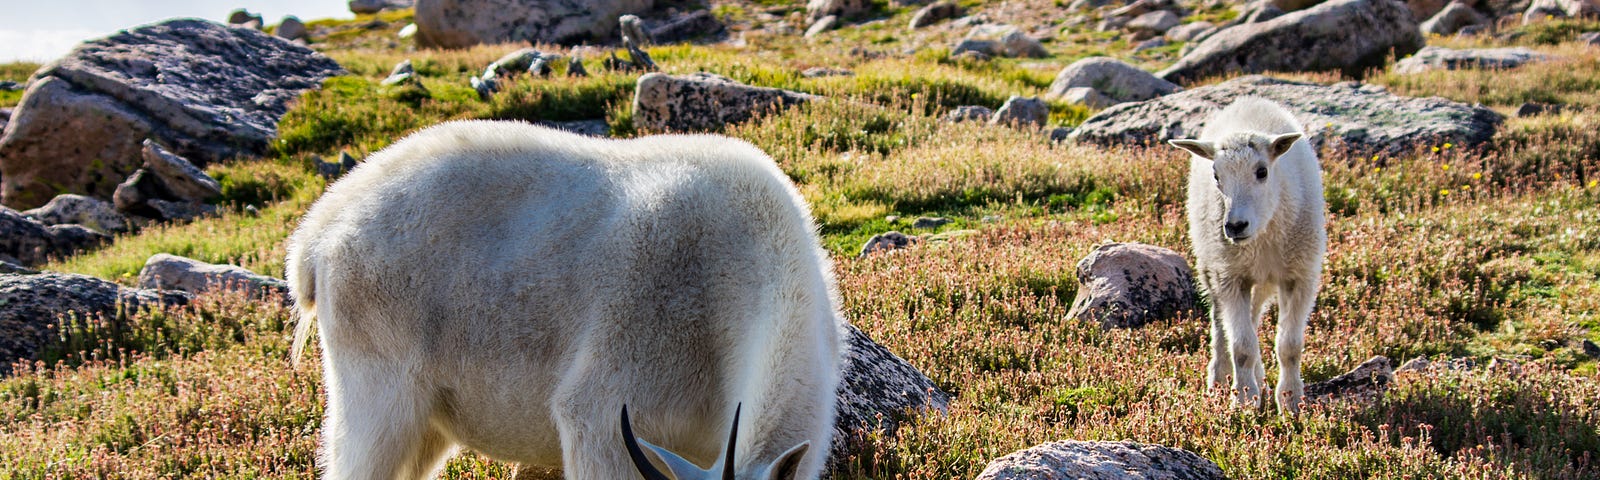 Mountain Goat adult and juvenile on Mount Evans in Colorado.